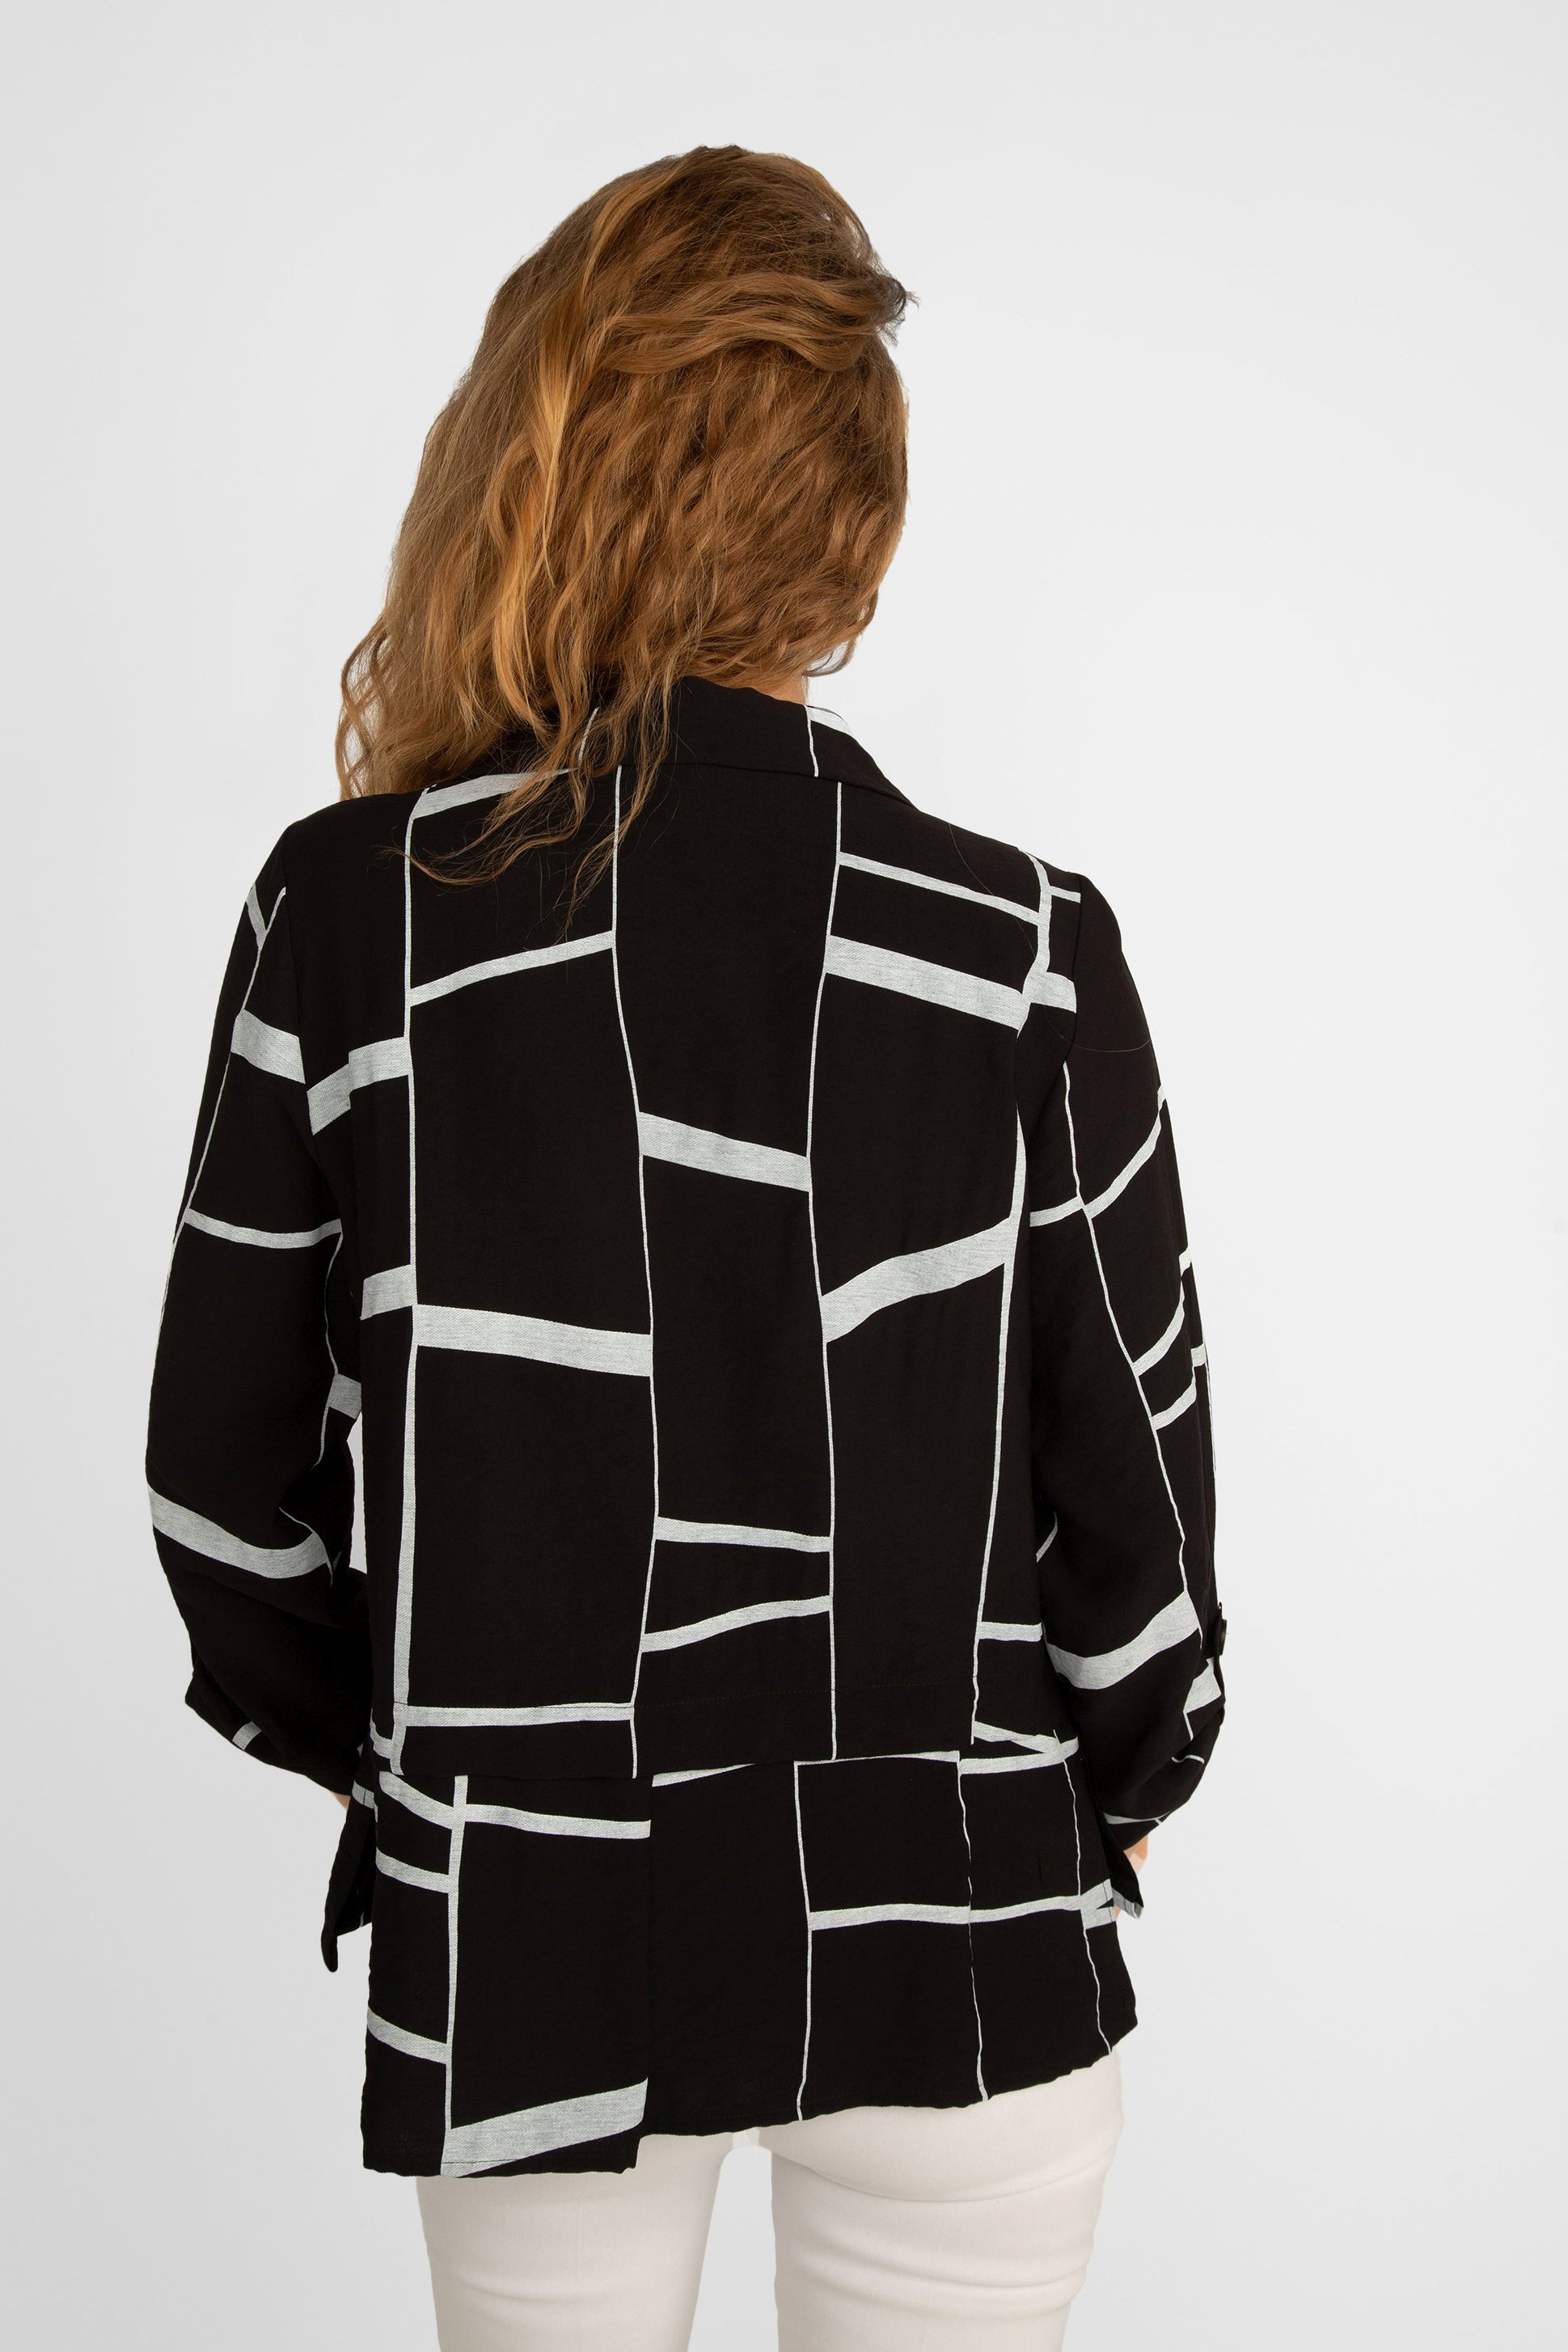 Back view of Picadilly (JM565QO) Women's Long Sleeve Black & White Button Up Rayon Jacket